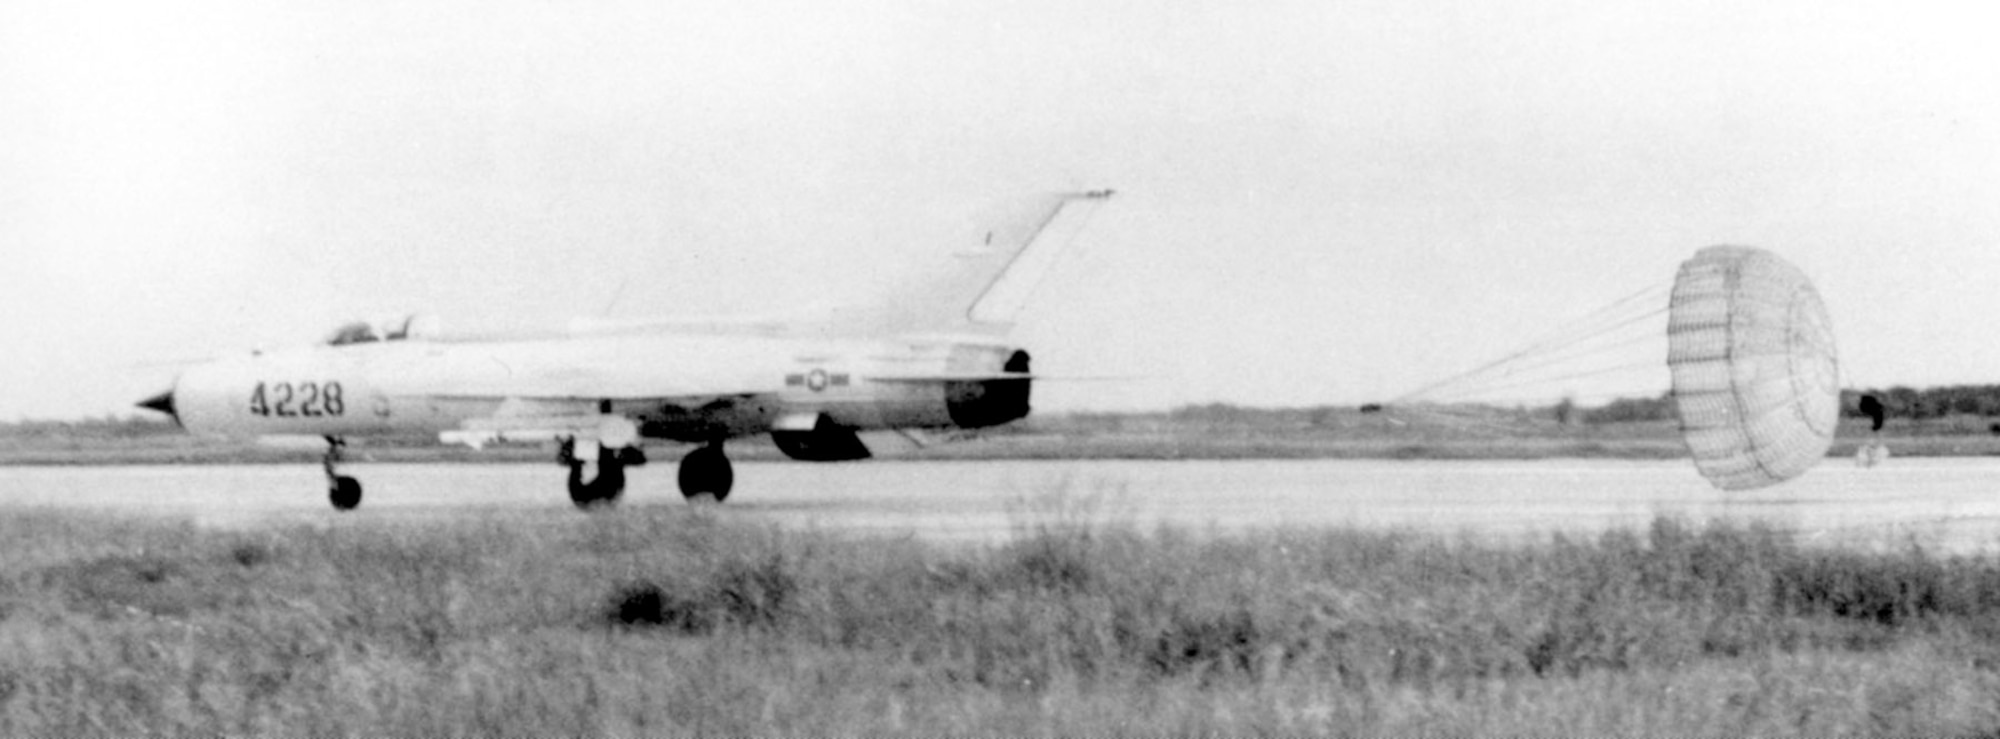 VPAF MiG-21 deploying its braking chute while landing after a mission. (U.S. Air Force photo)